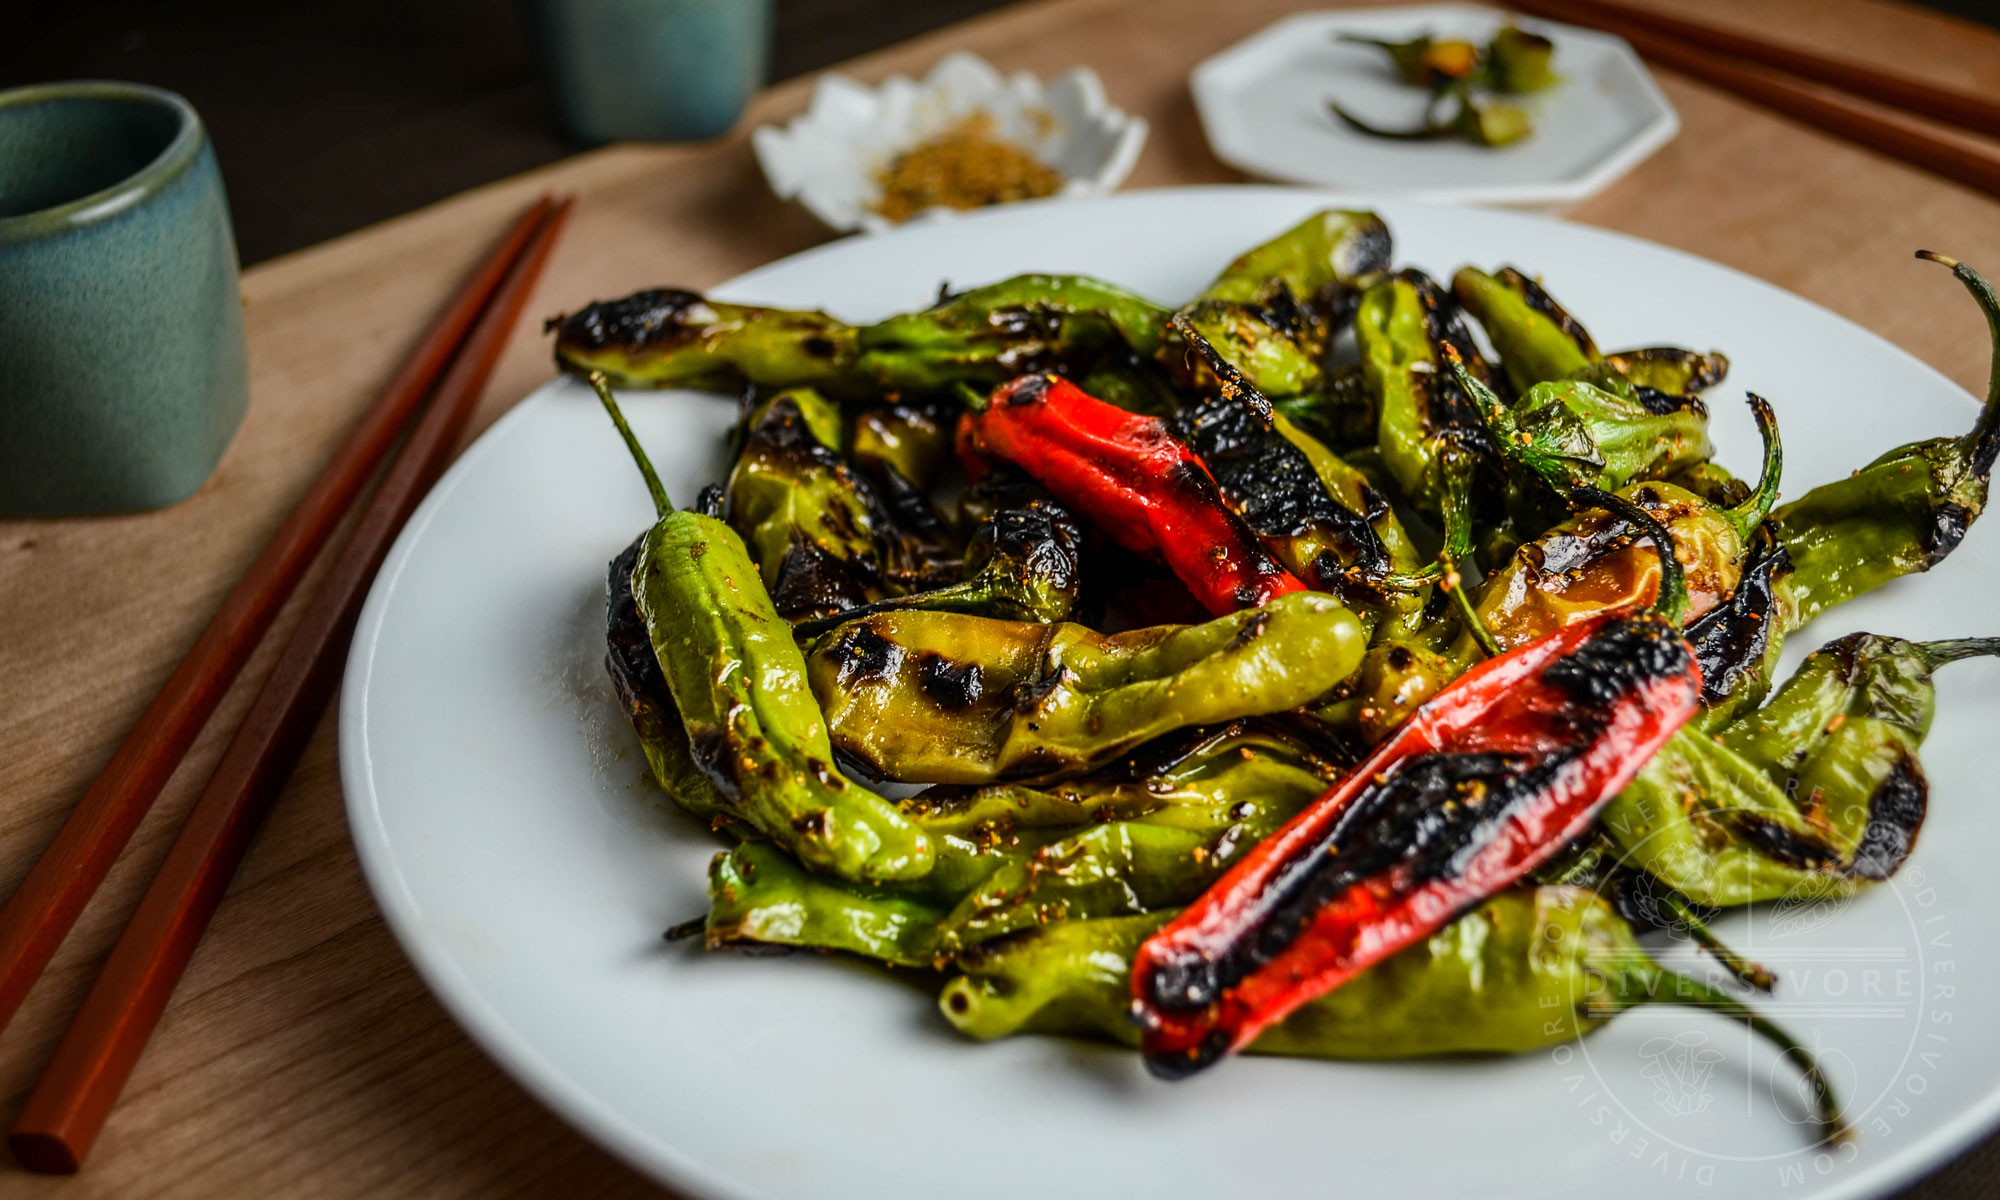 Charred shishito peppers with a sweet and spicy shichimi togarashi glaze on a white plate